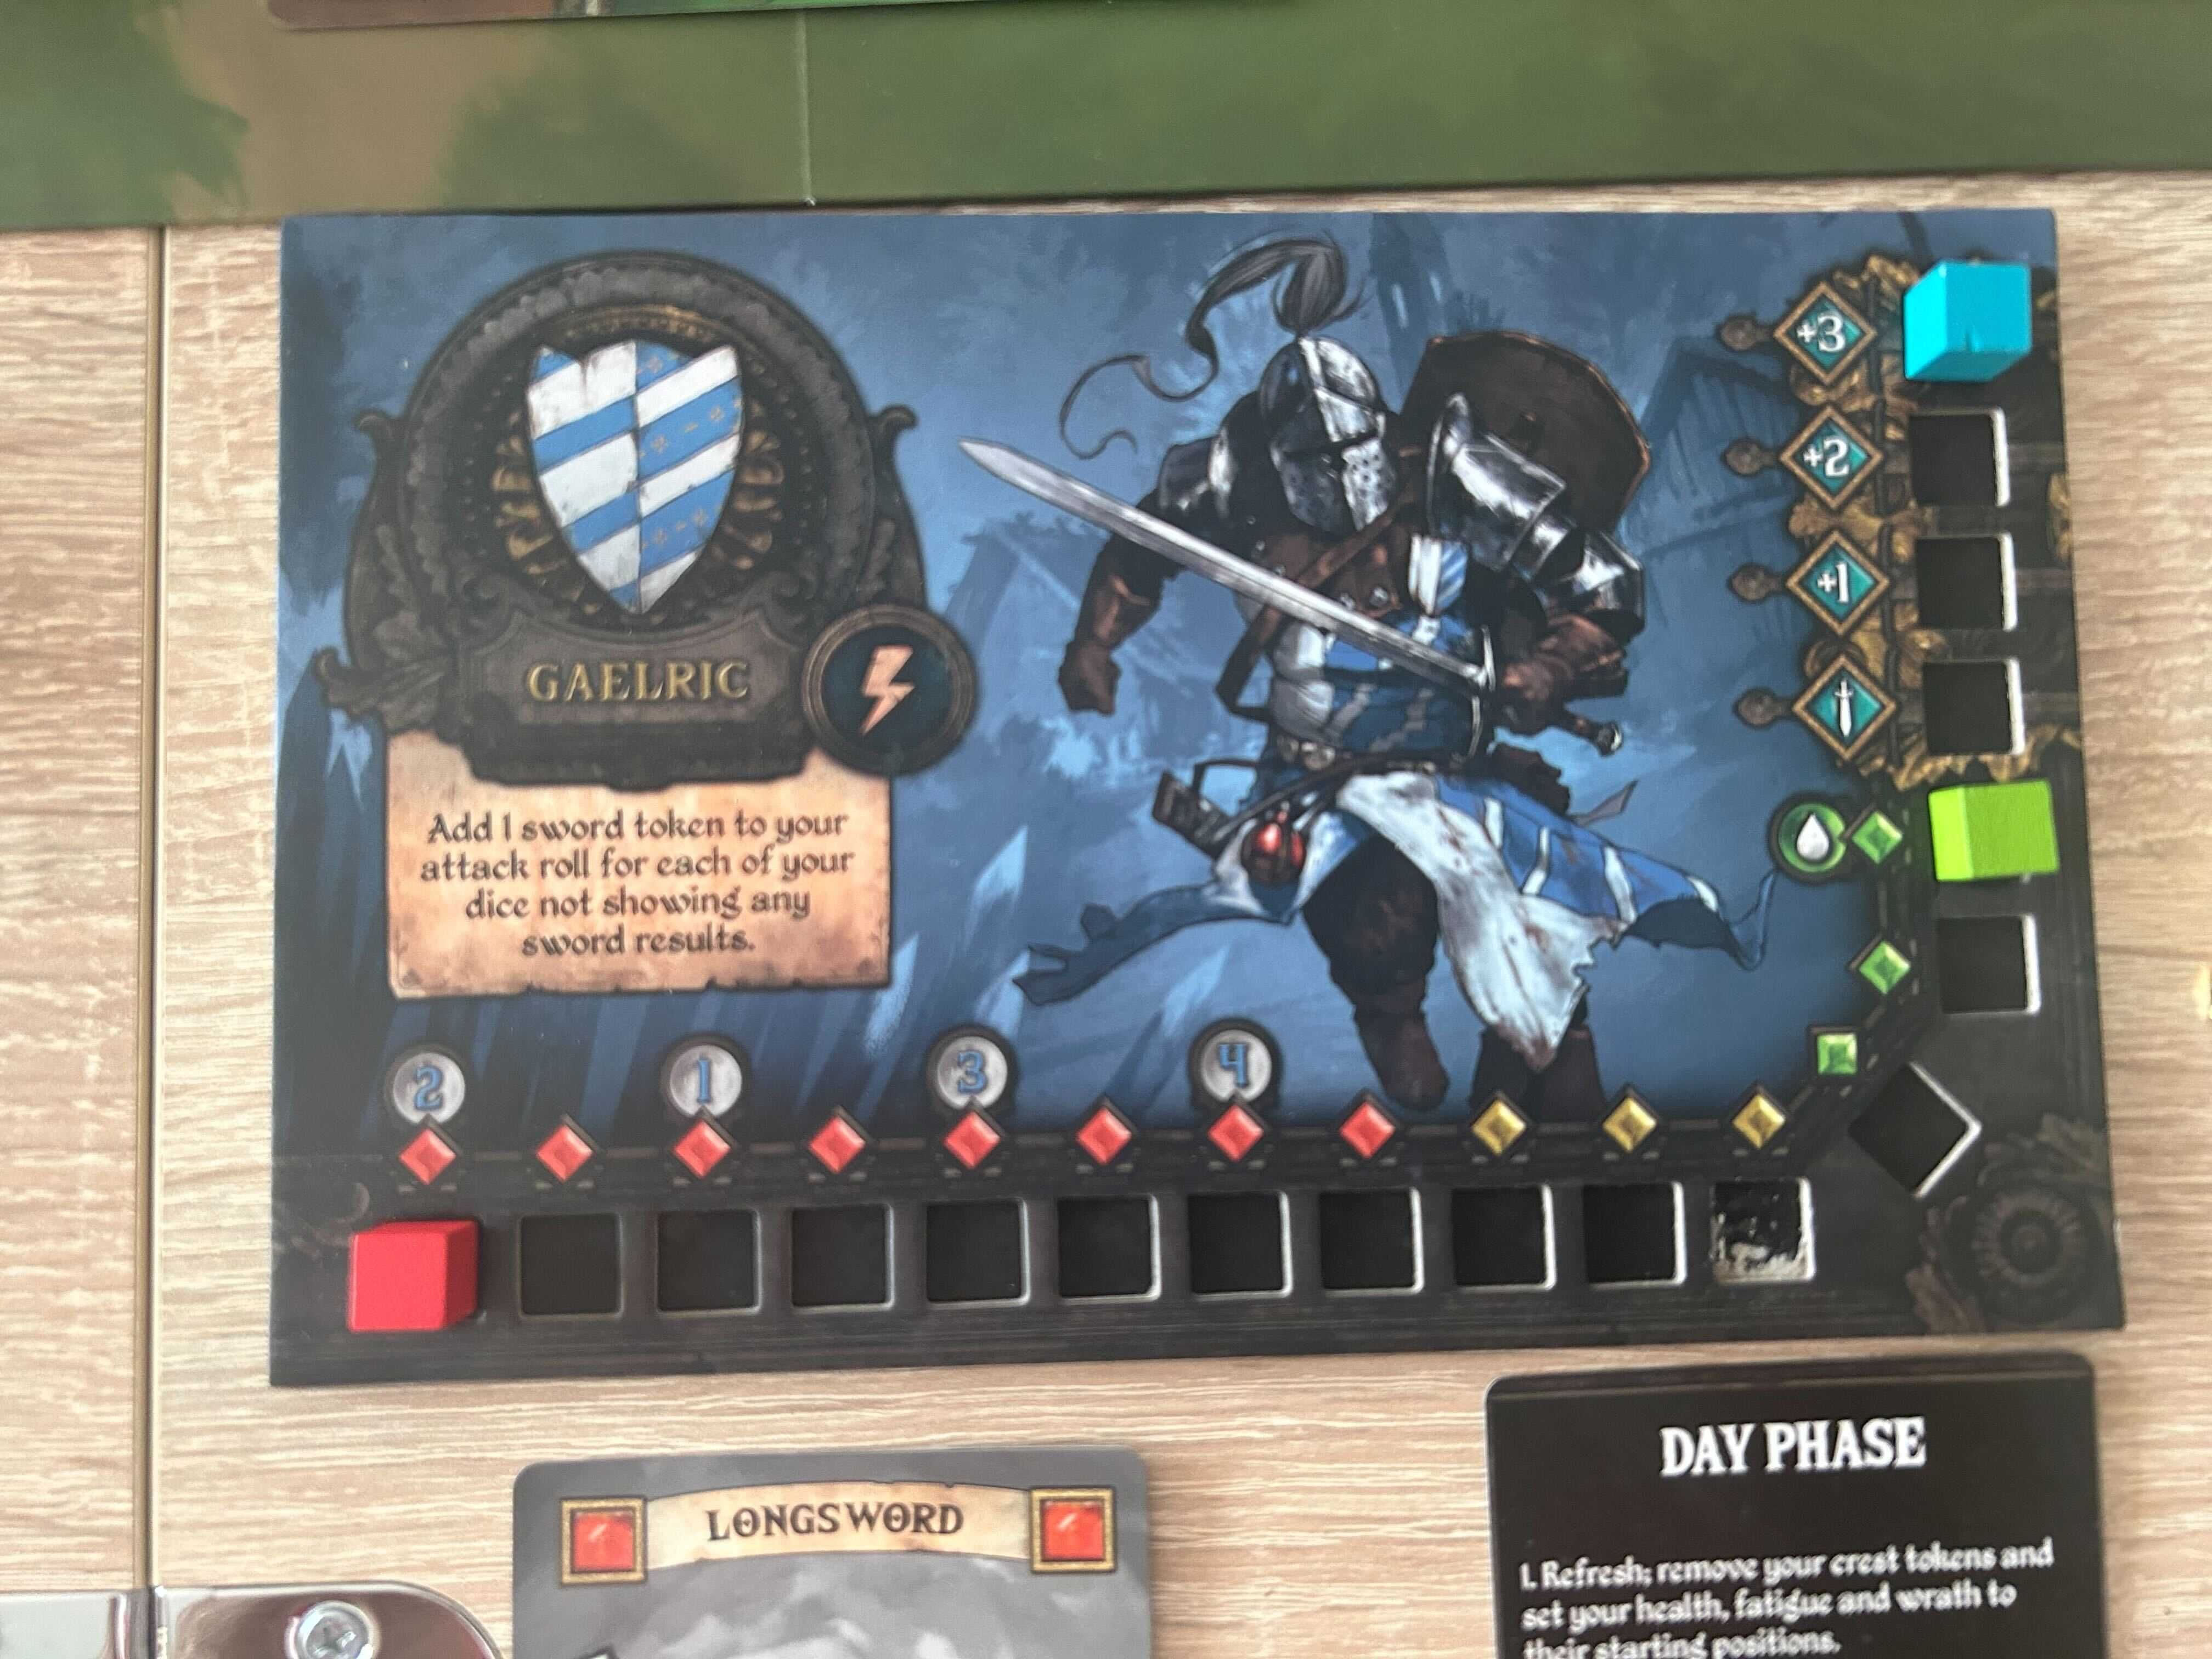 Knight Tales Boardgame